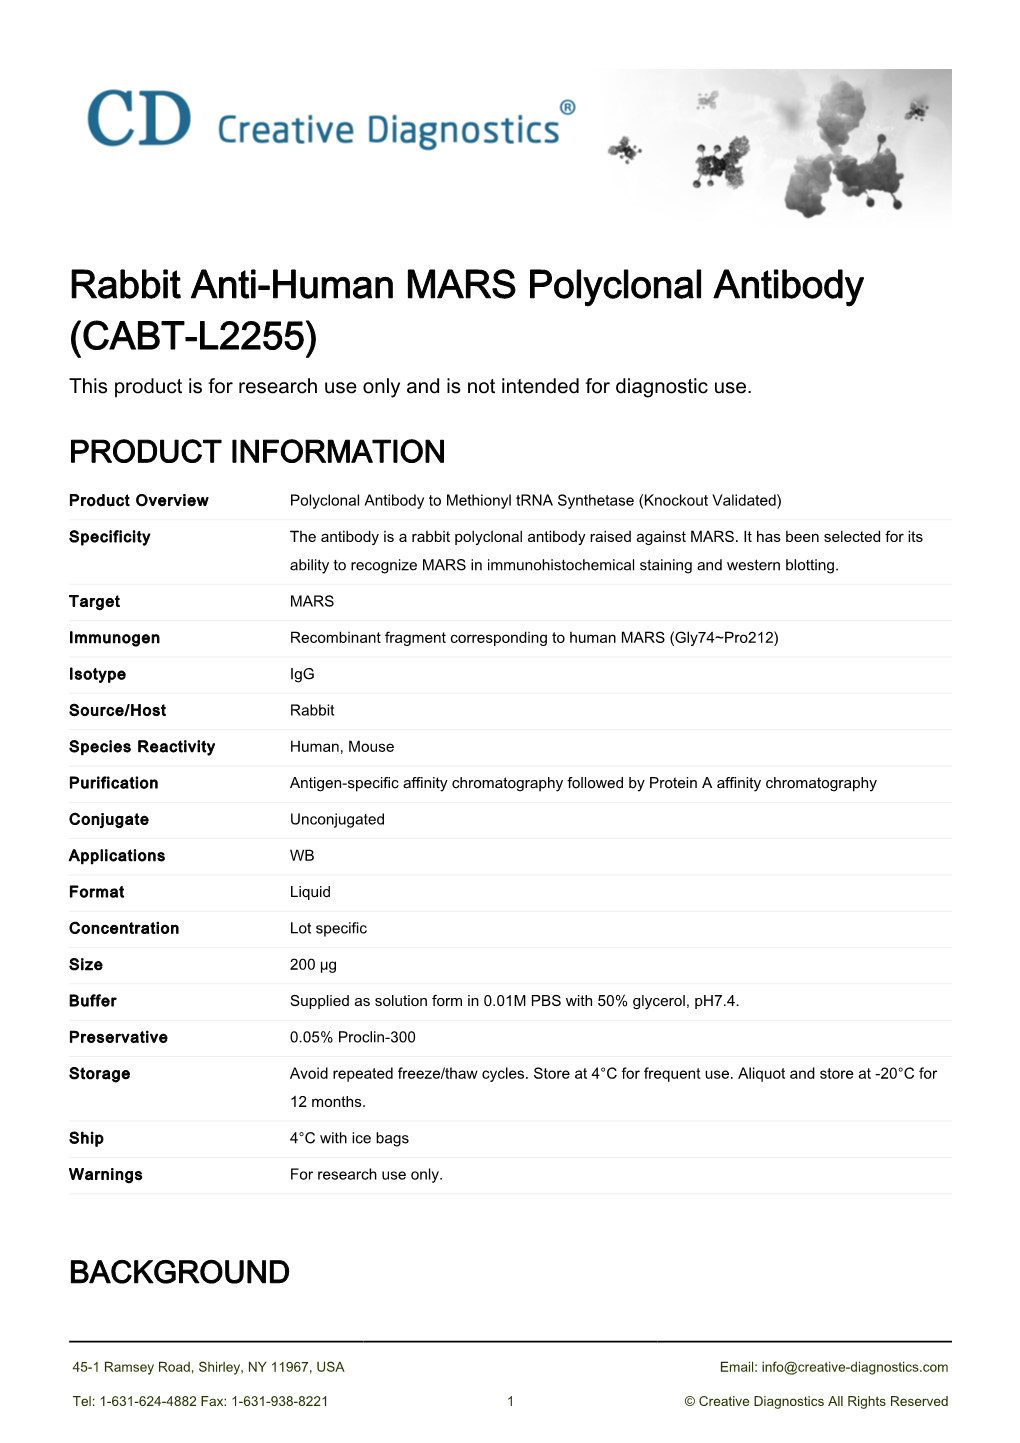 Rabbit Anti-Human MARS Polyclonal Antibody (CABT-L2255) This Product Is for Research Use Only and Is Not Intended for Diagnostic Use